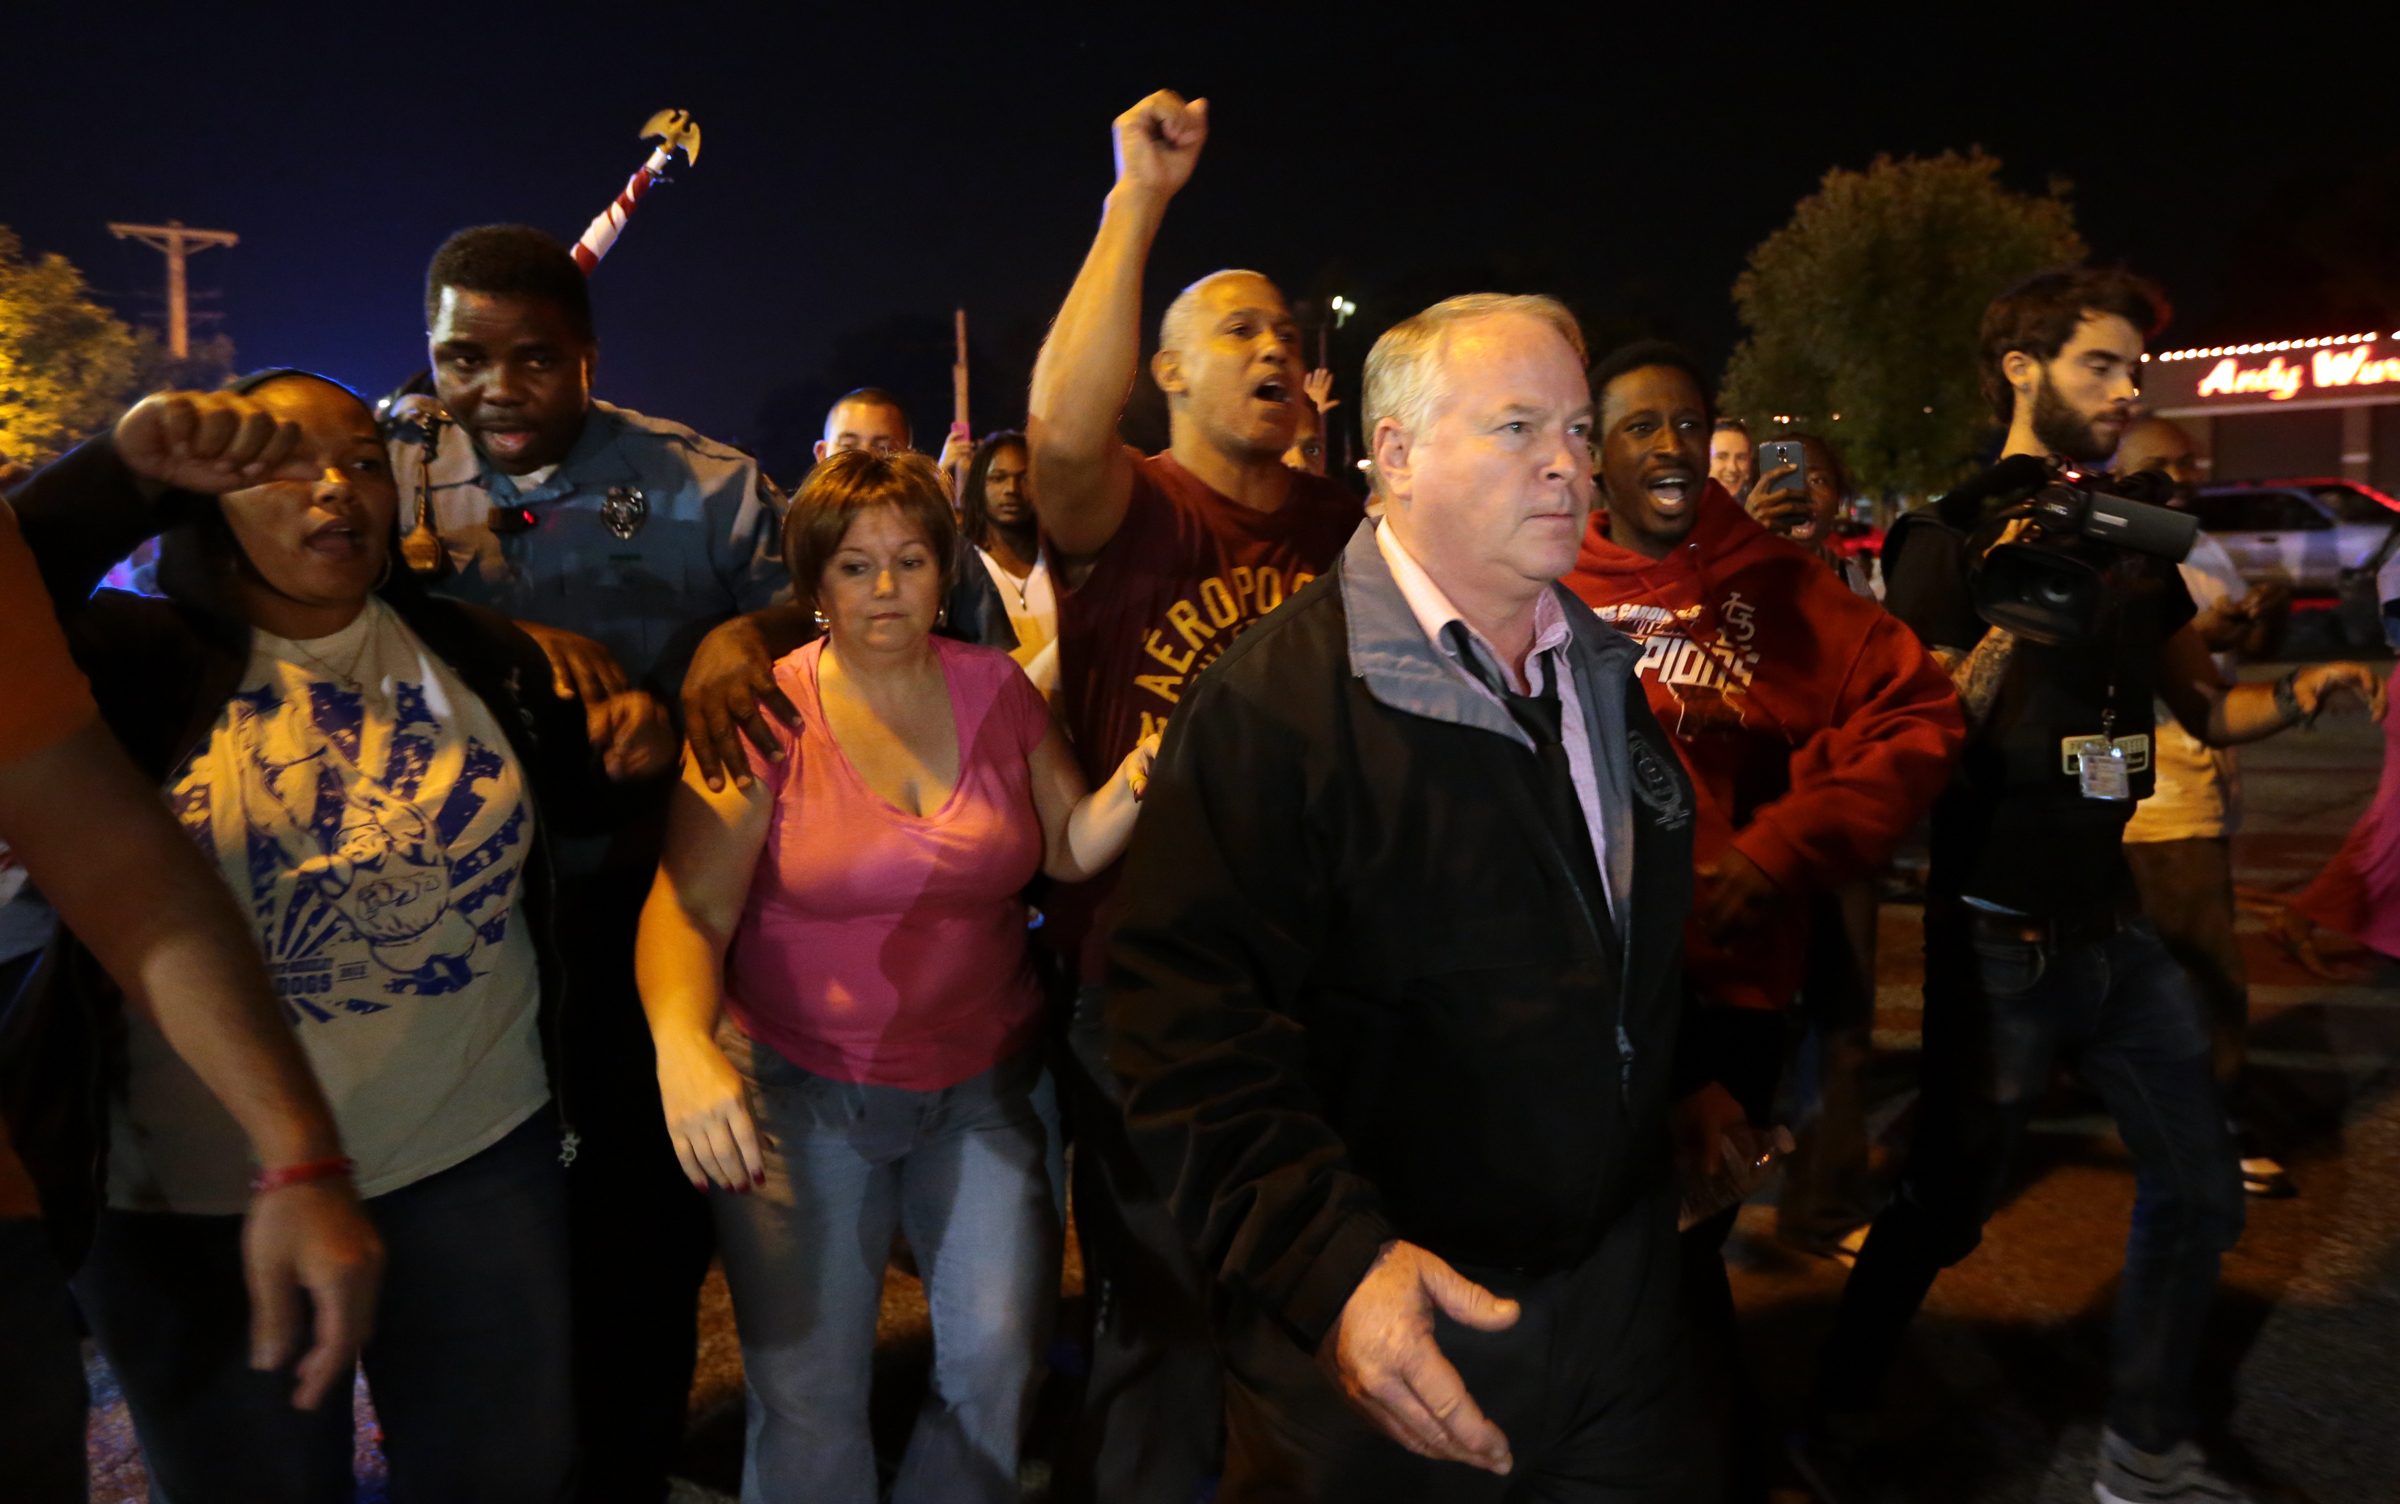 Ferguson Police Chief Tom Jackson begins to march with protesters before clashes led to arrests in front of the Ferguson Police Department, on Thursday, Sept. 25, 2014. (Robert Cohen—AP)